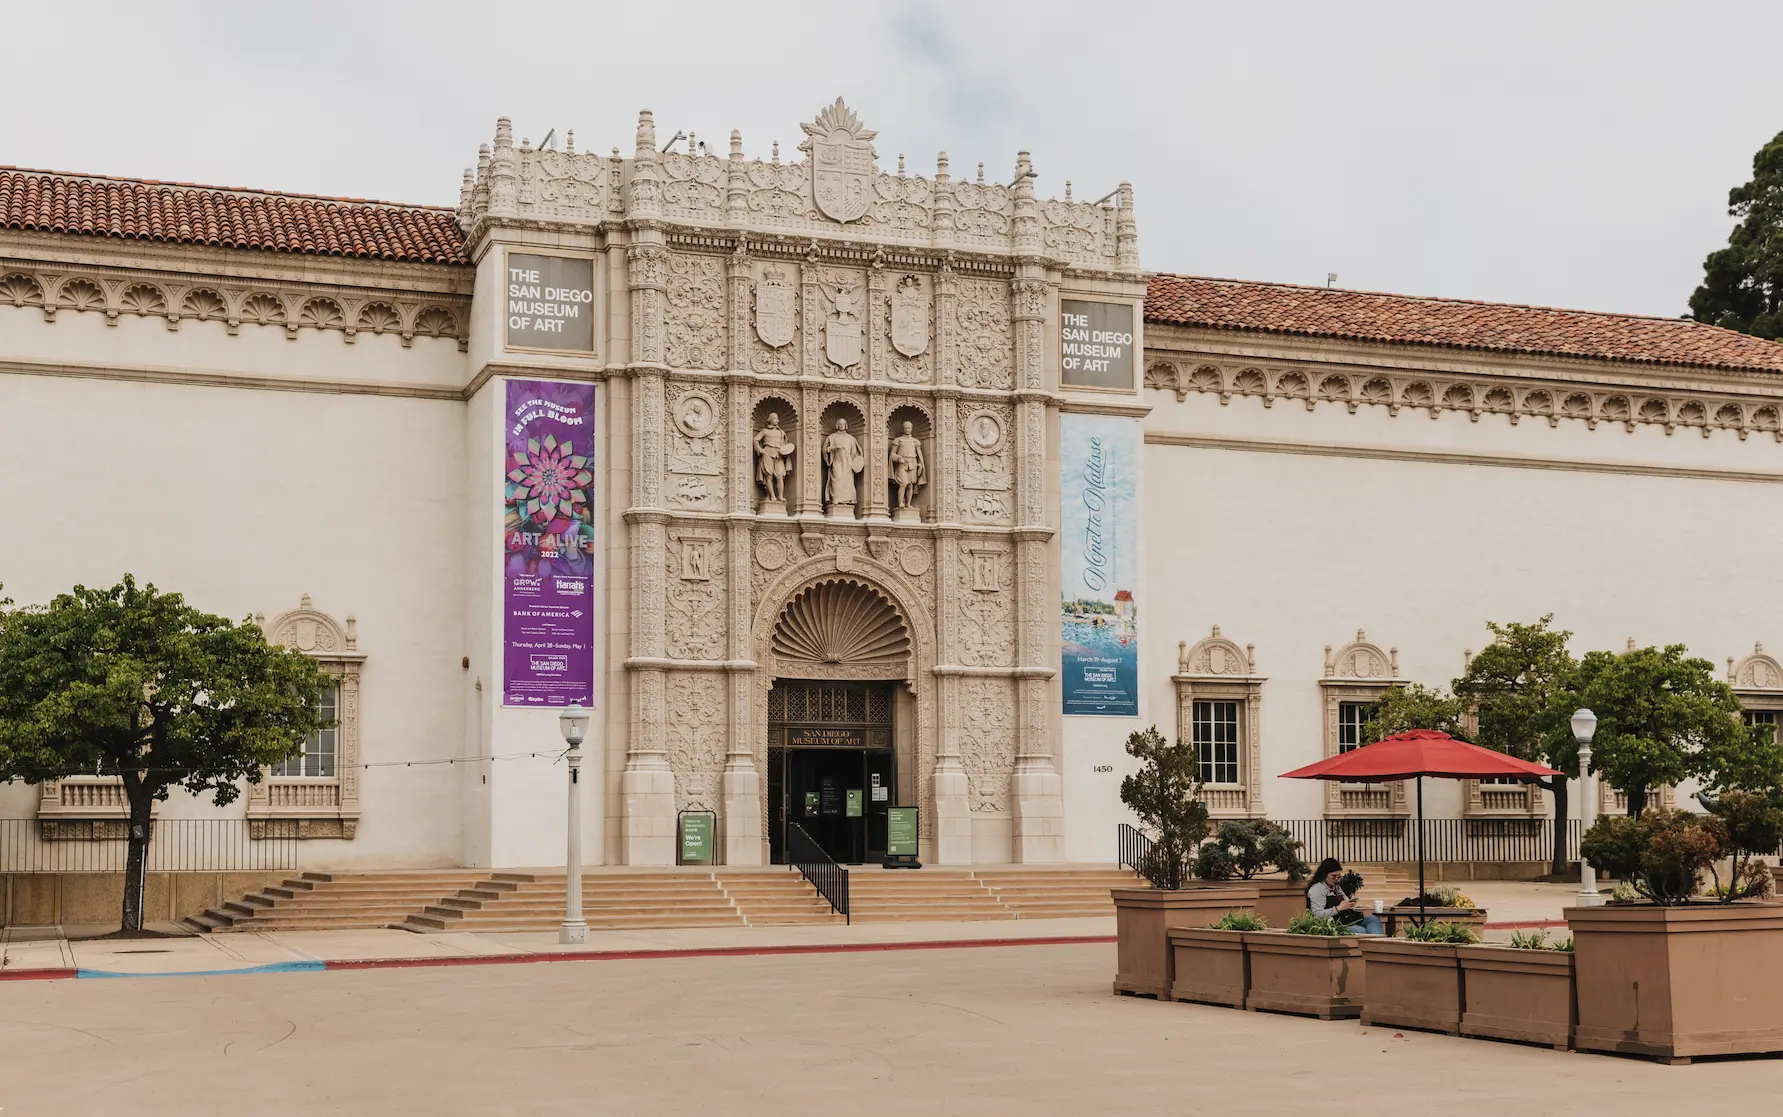 The entrance to the San Diego Museum of Art.